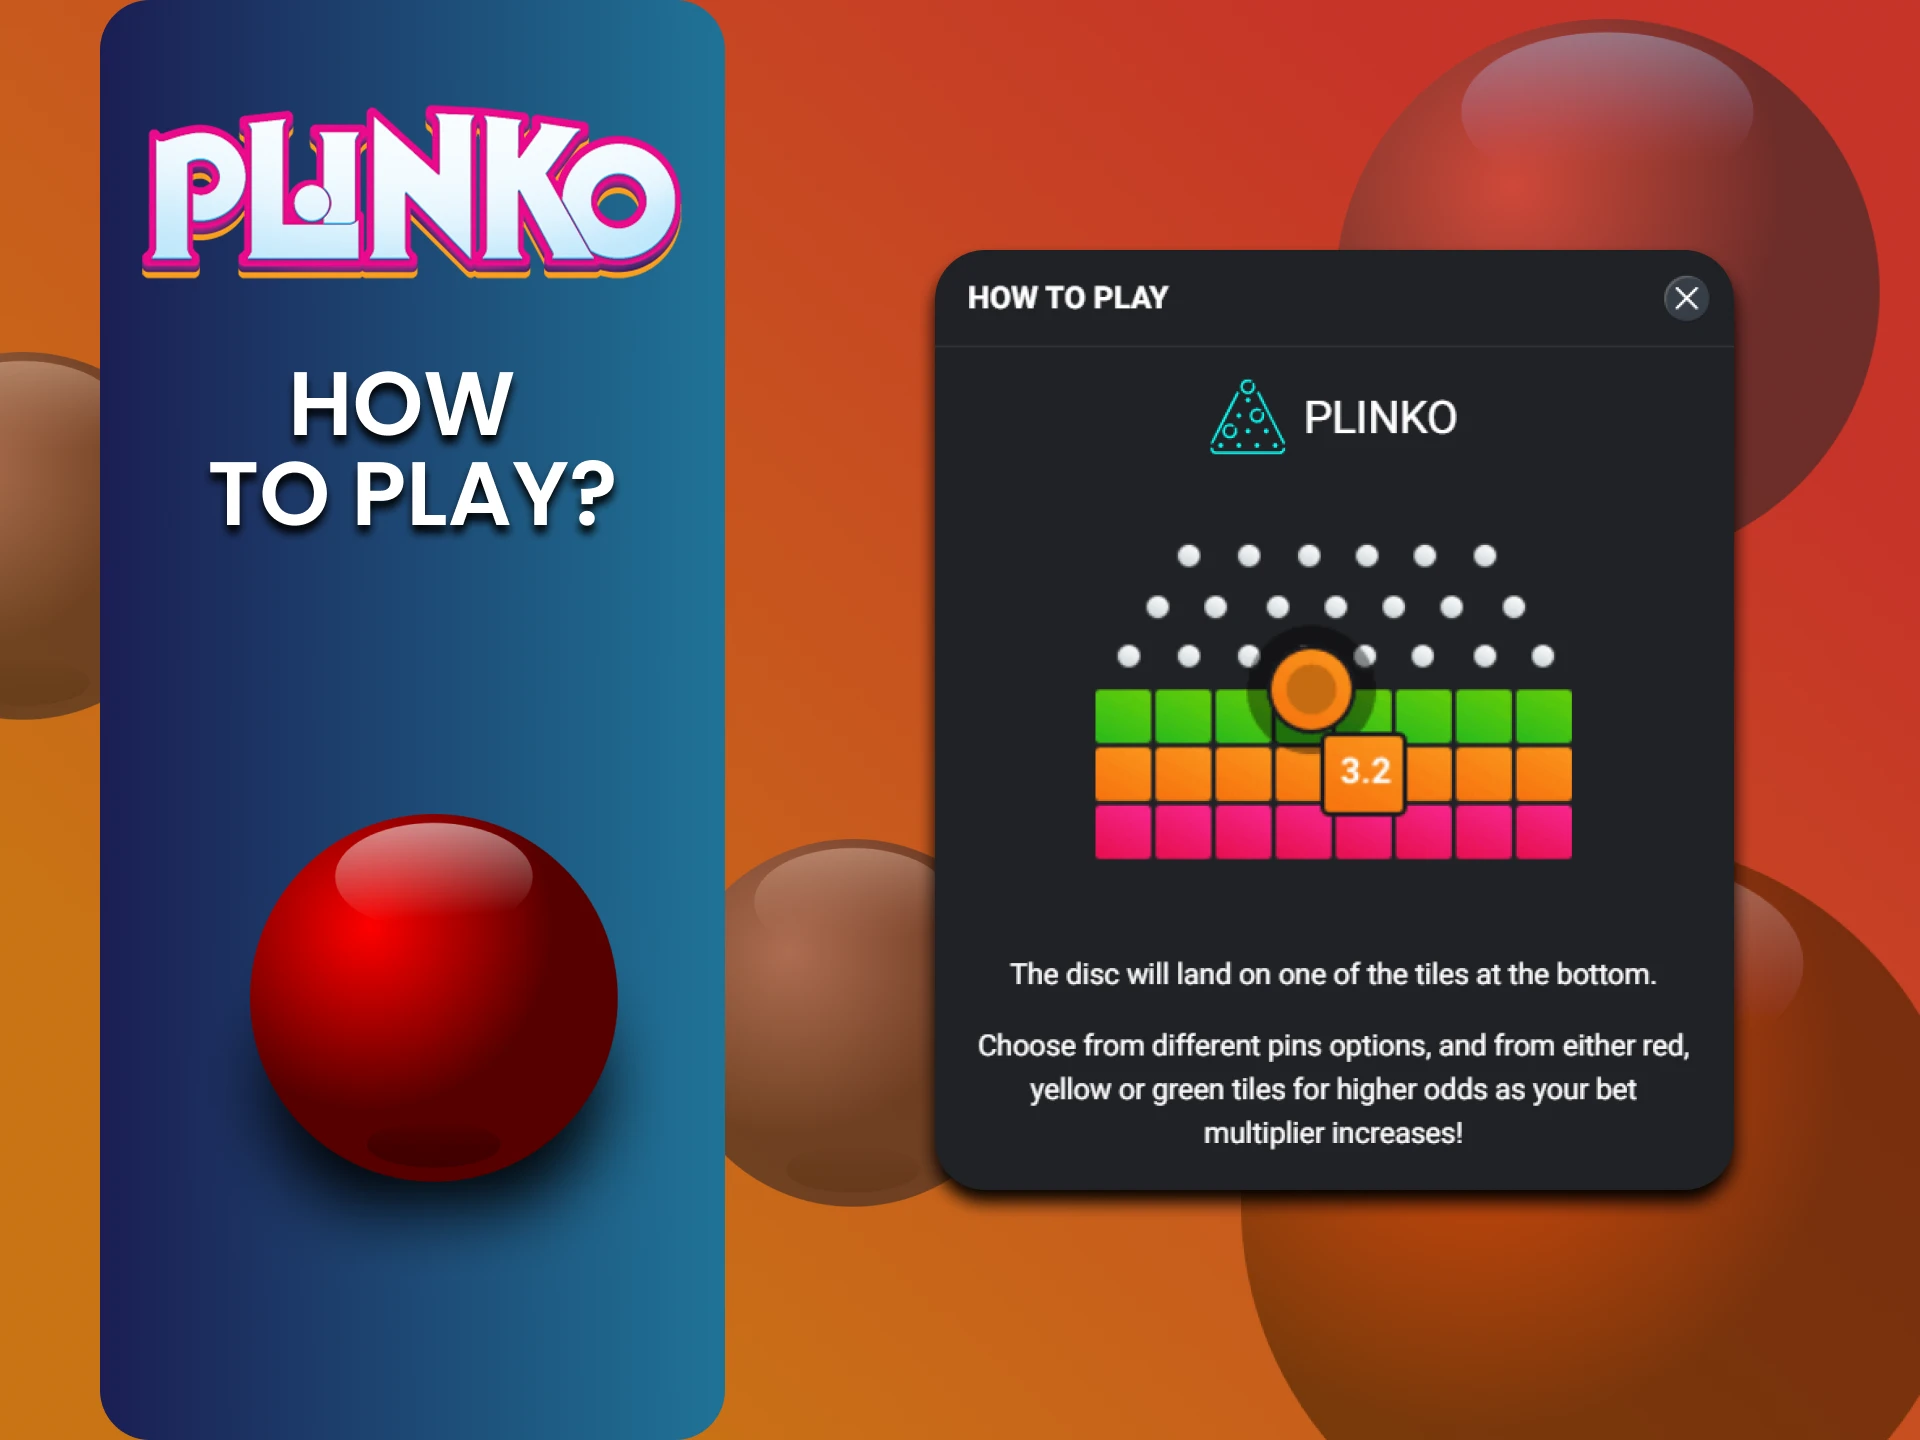 We will tell you how to start playing Plinko.